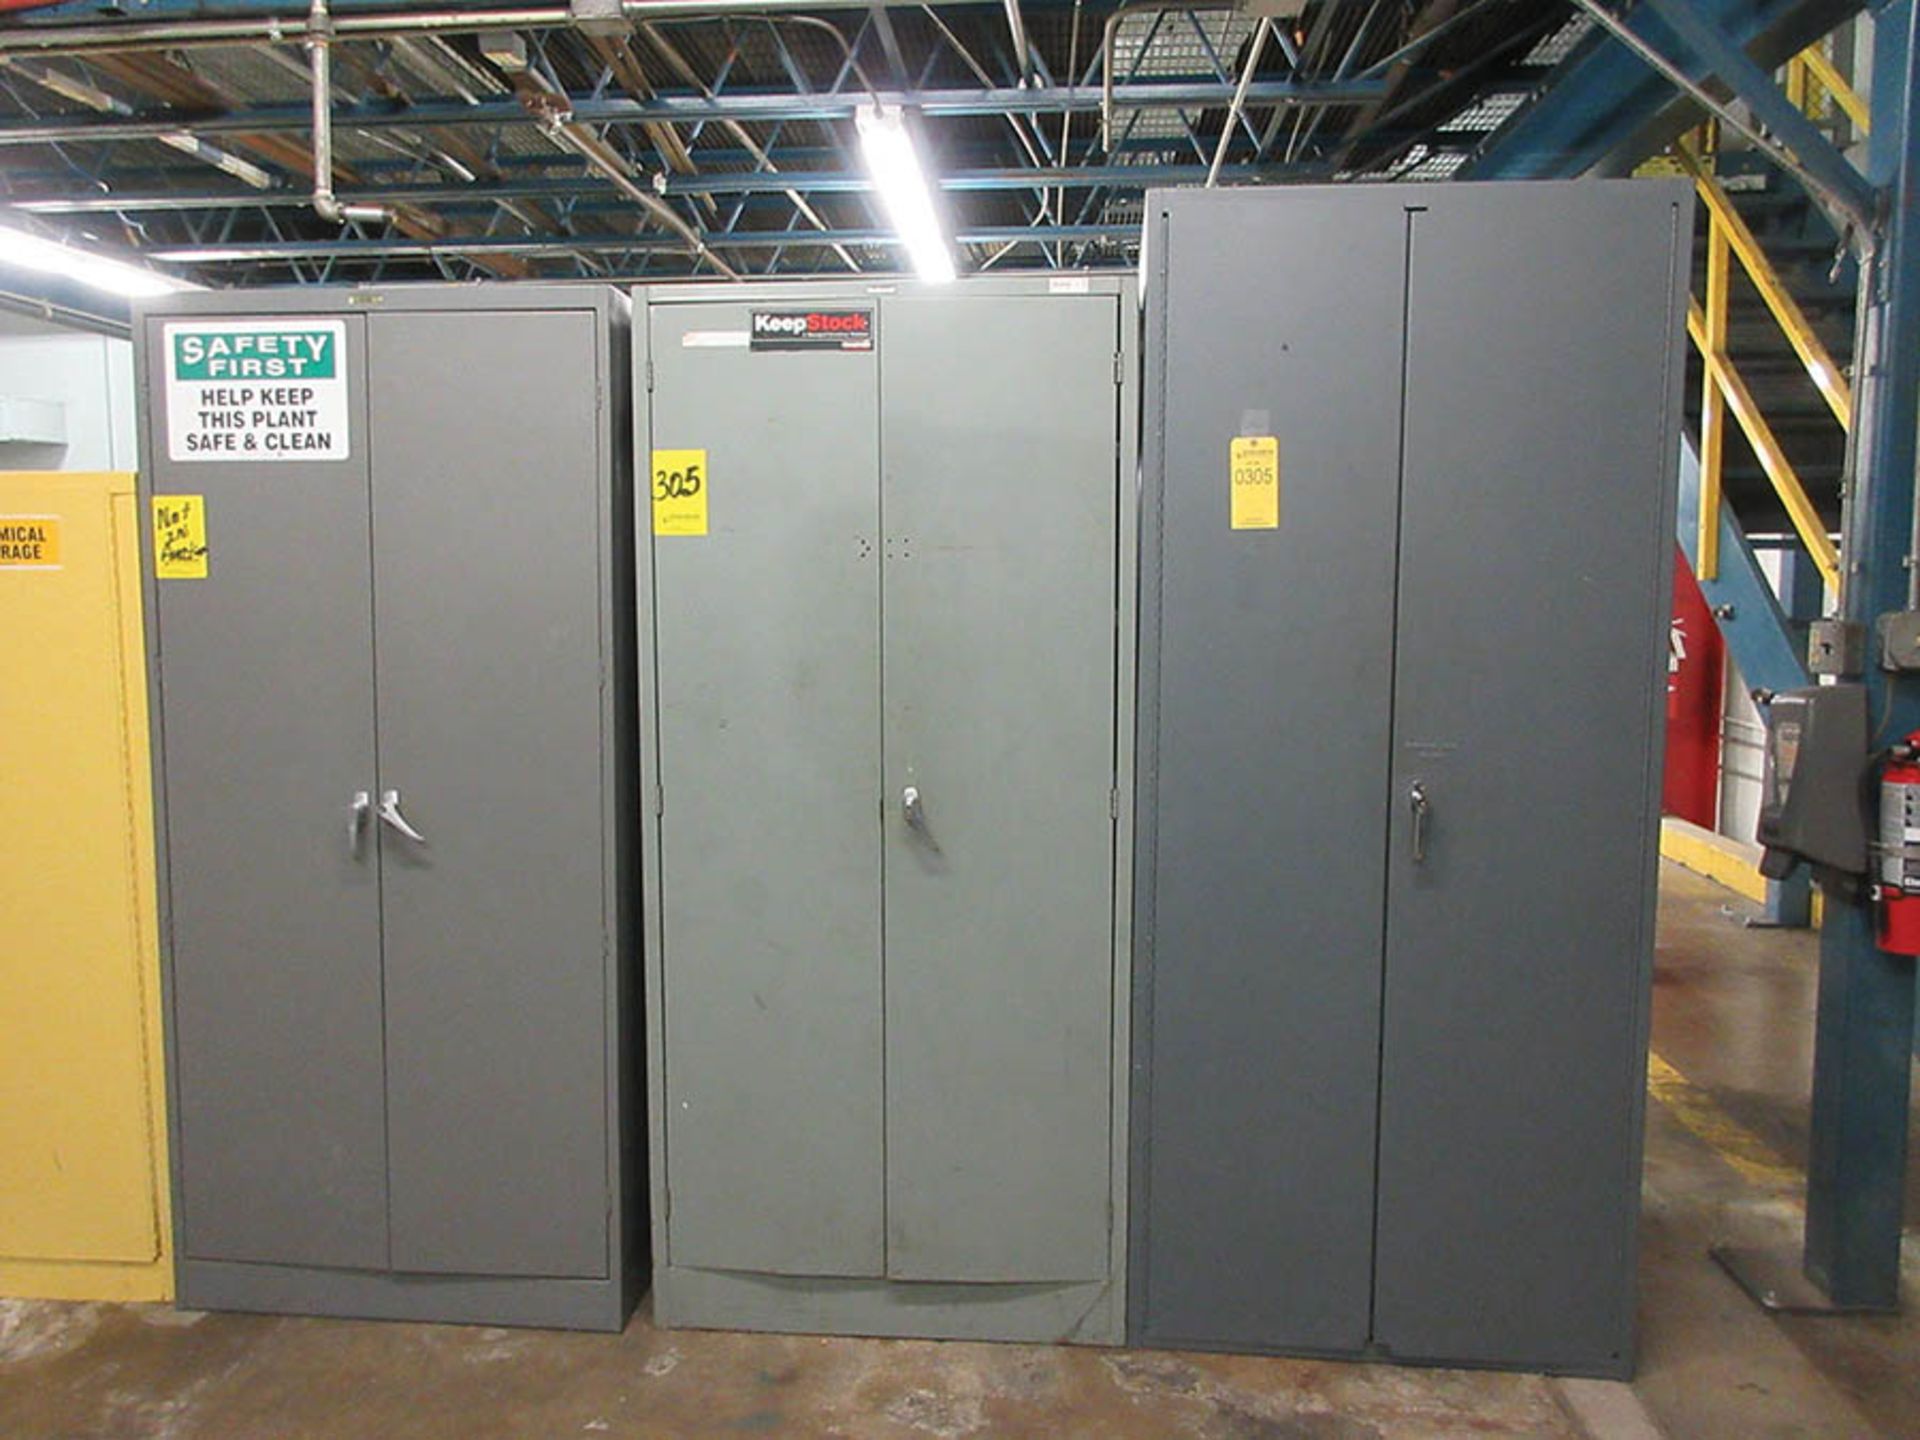 (2) CABINETS W/ CONTENTS OF SERVO MOTORS AND MISCELLANEOUS